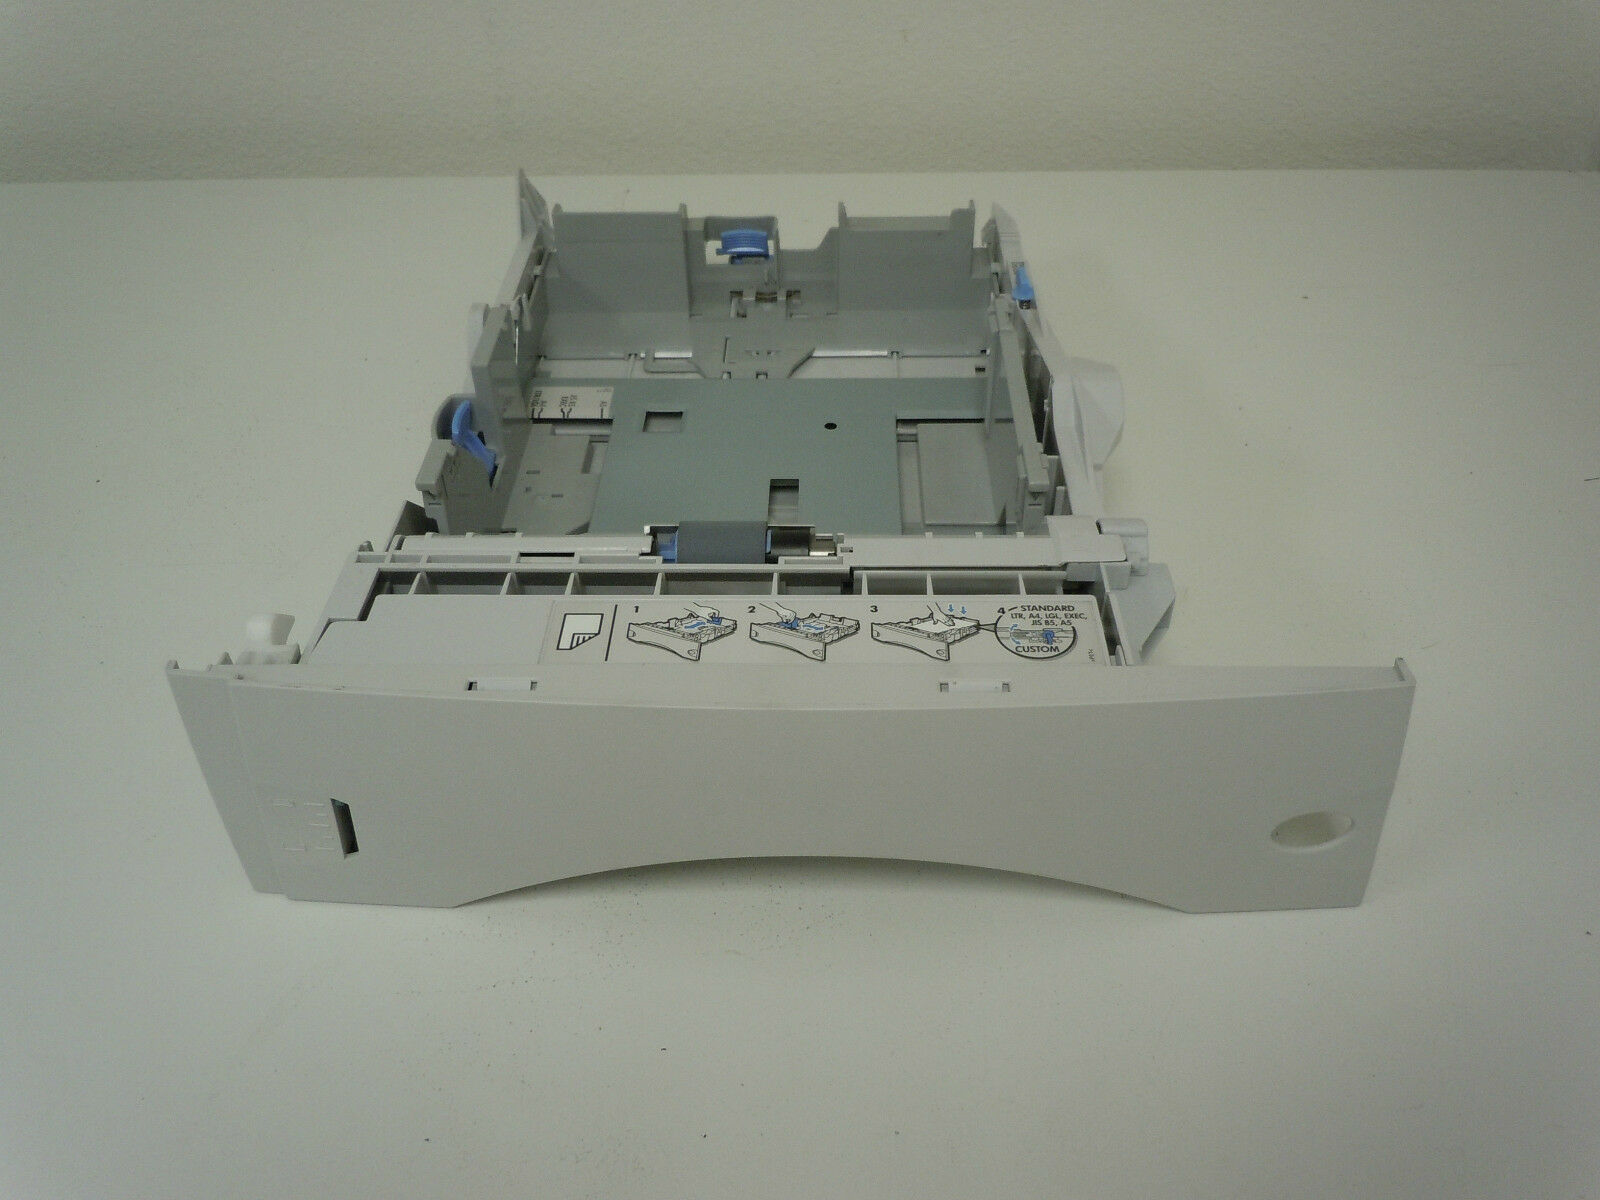 MINT HP LASERJET 4200 4300 PRINTER REPLACEMENT PAPER TRAY #2 (MAIN PAPER TRAY)